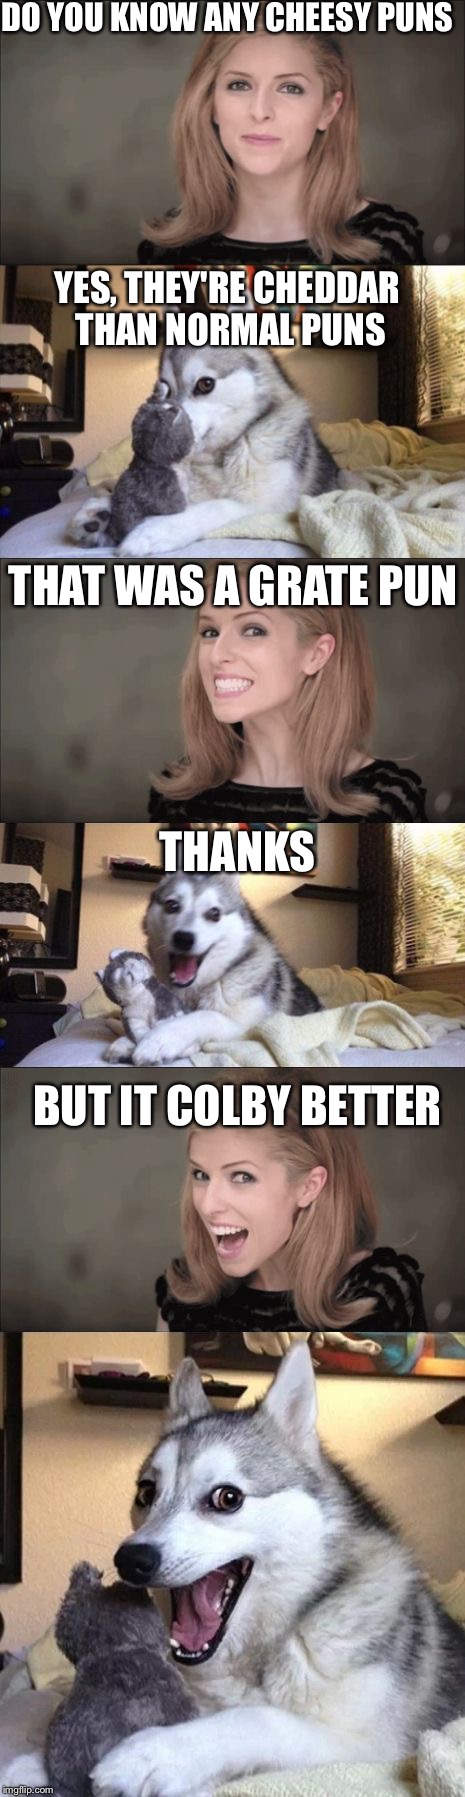 Anna and Bad Pun Dog Work Together | DO YOU KNOW ANY CHEESY PUNS; YES, THEY'RE CHEDDAR THAN NORMAL PUNS; THAT WAS A GRATE PUN; THANKS; BUT IT COLBY BETTER | image tagged in anna and bad pun dog work together | made w/ Imgflip meme maker